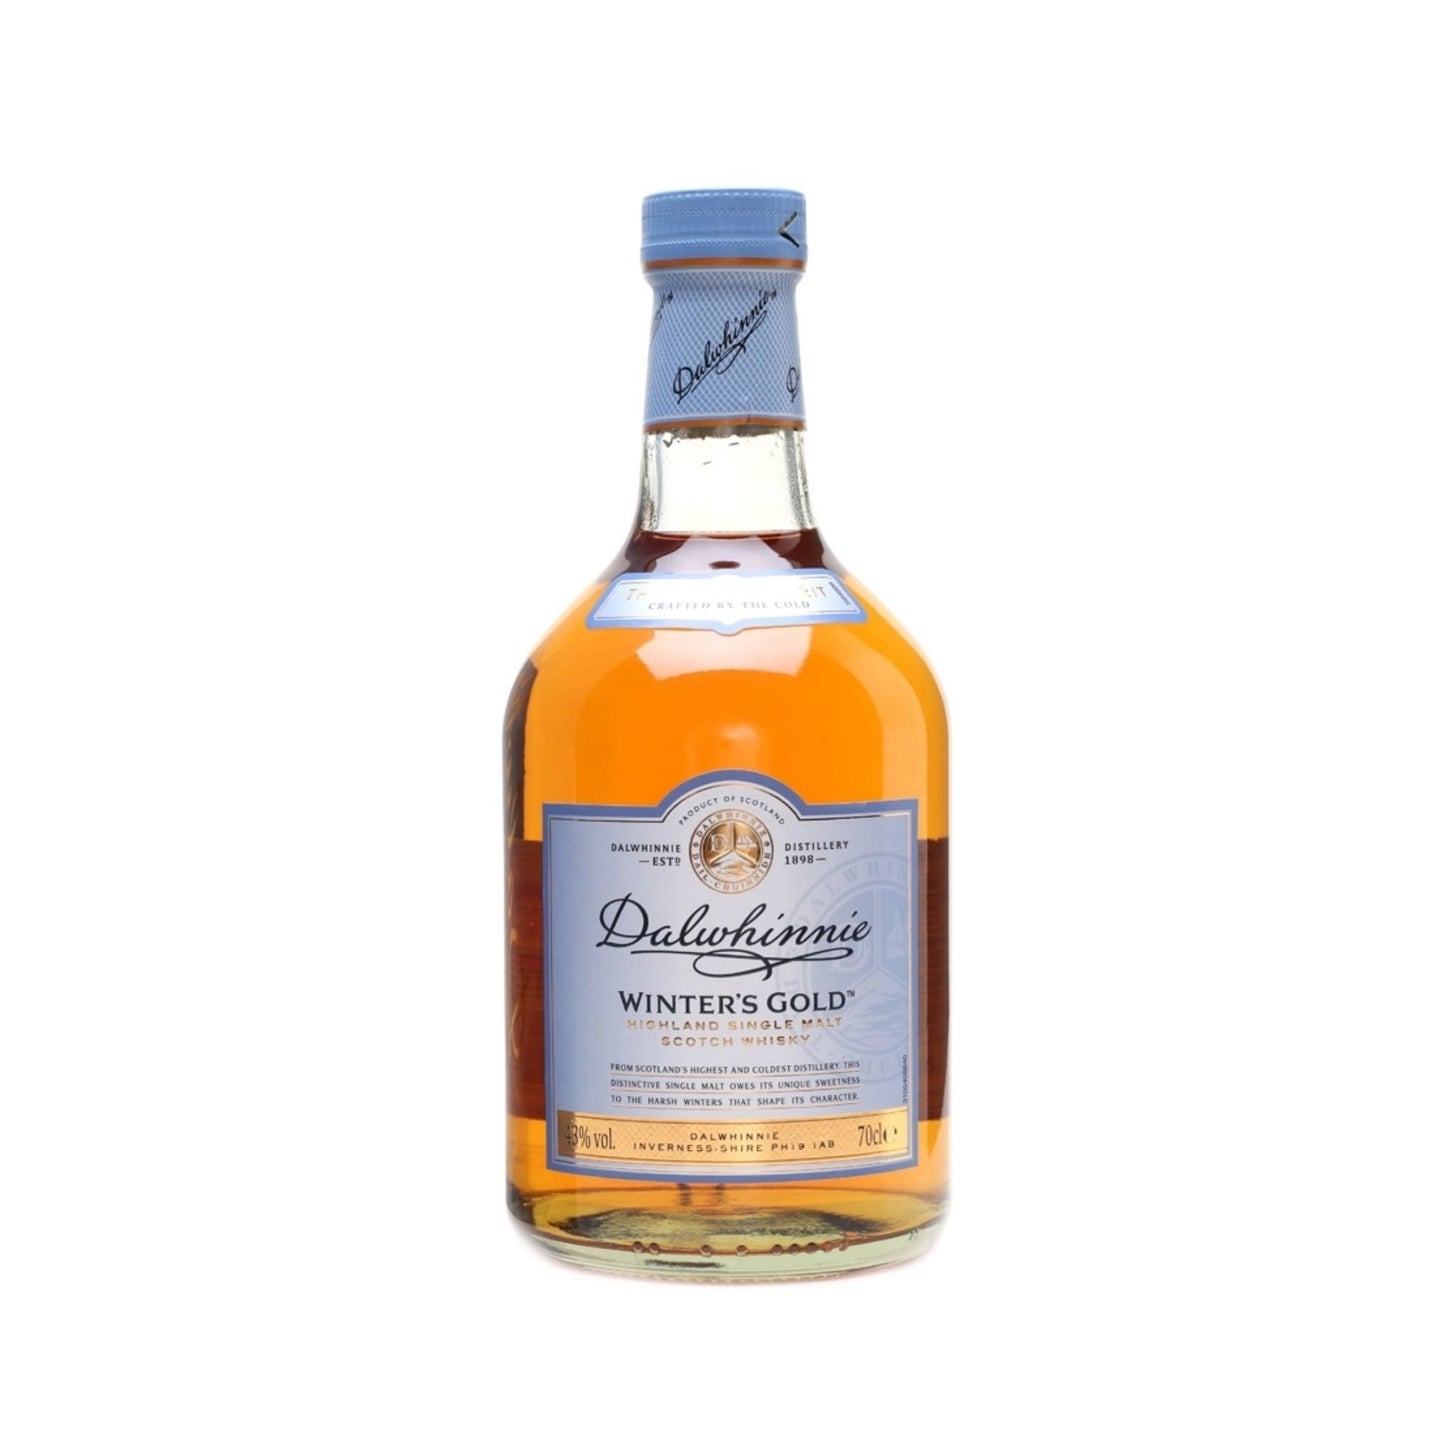 DALWHINNIE WINTERS GOLD 07LT